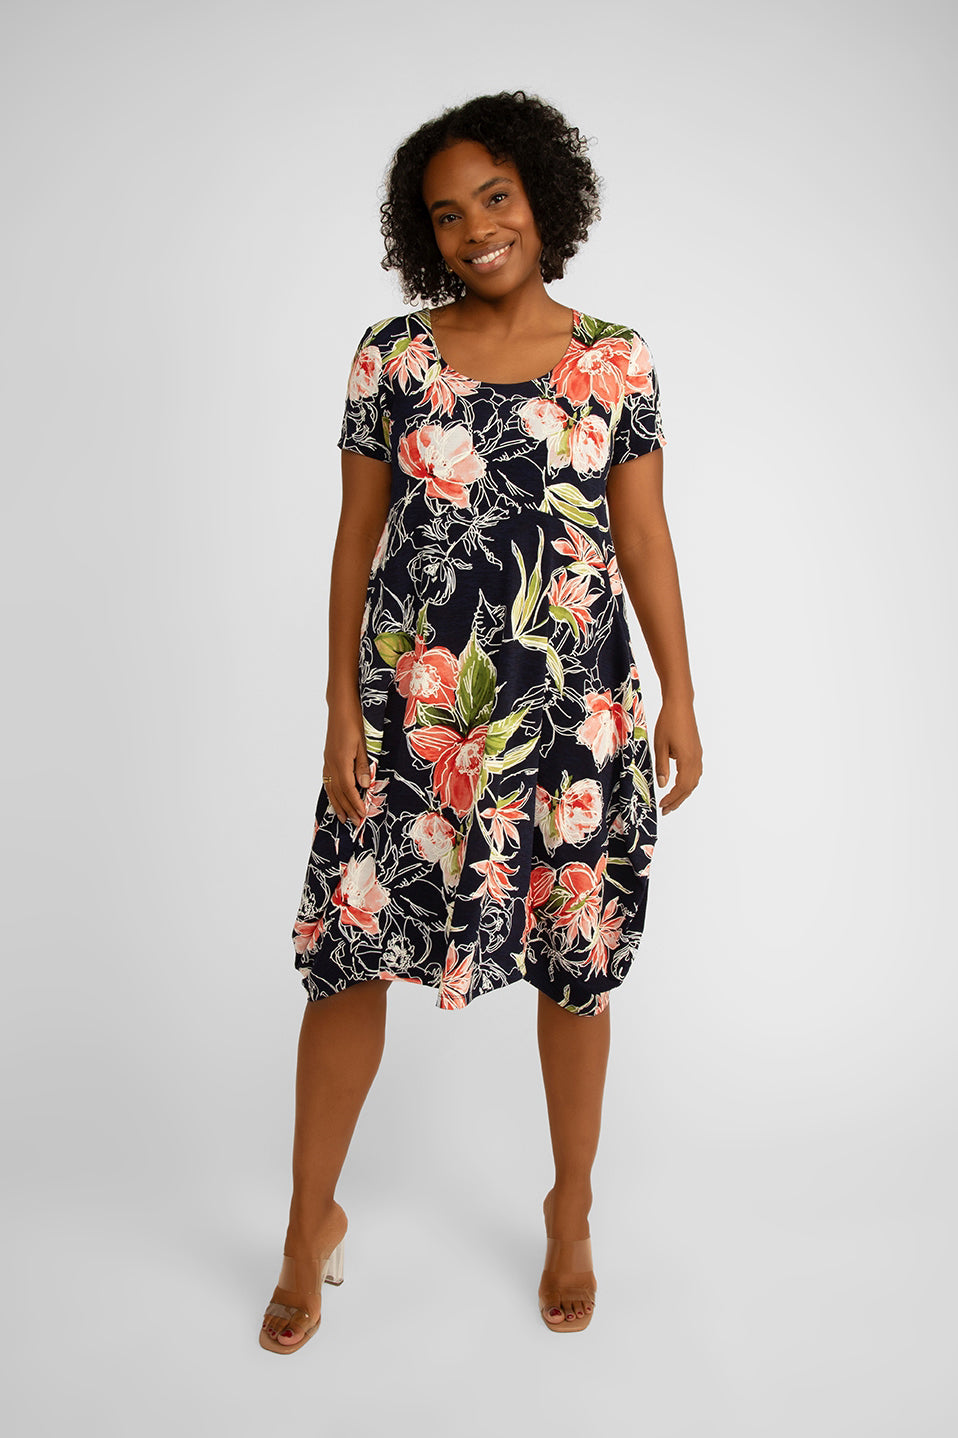 Compli K (33508) Women's Short Sleeve Cocoon Dress in Navy with pink floral print with puffy white floral illustrations